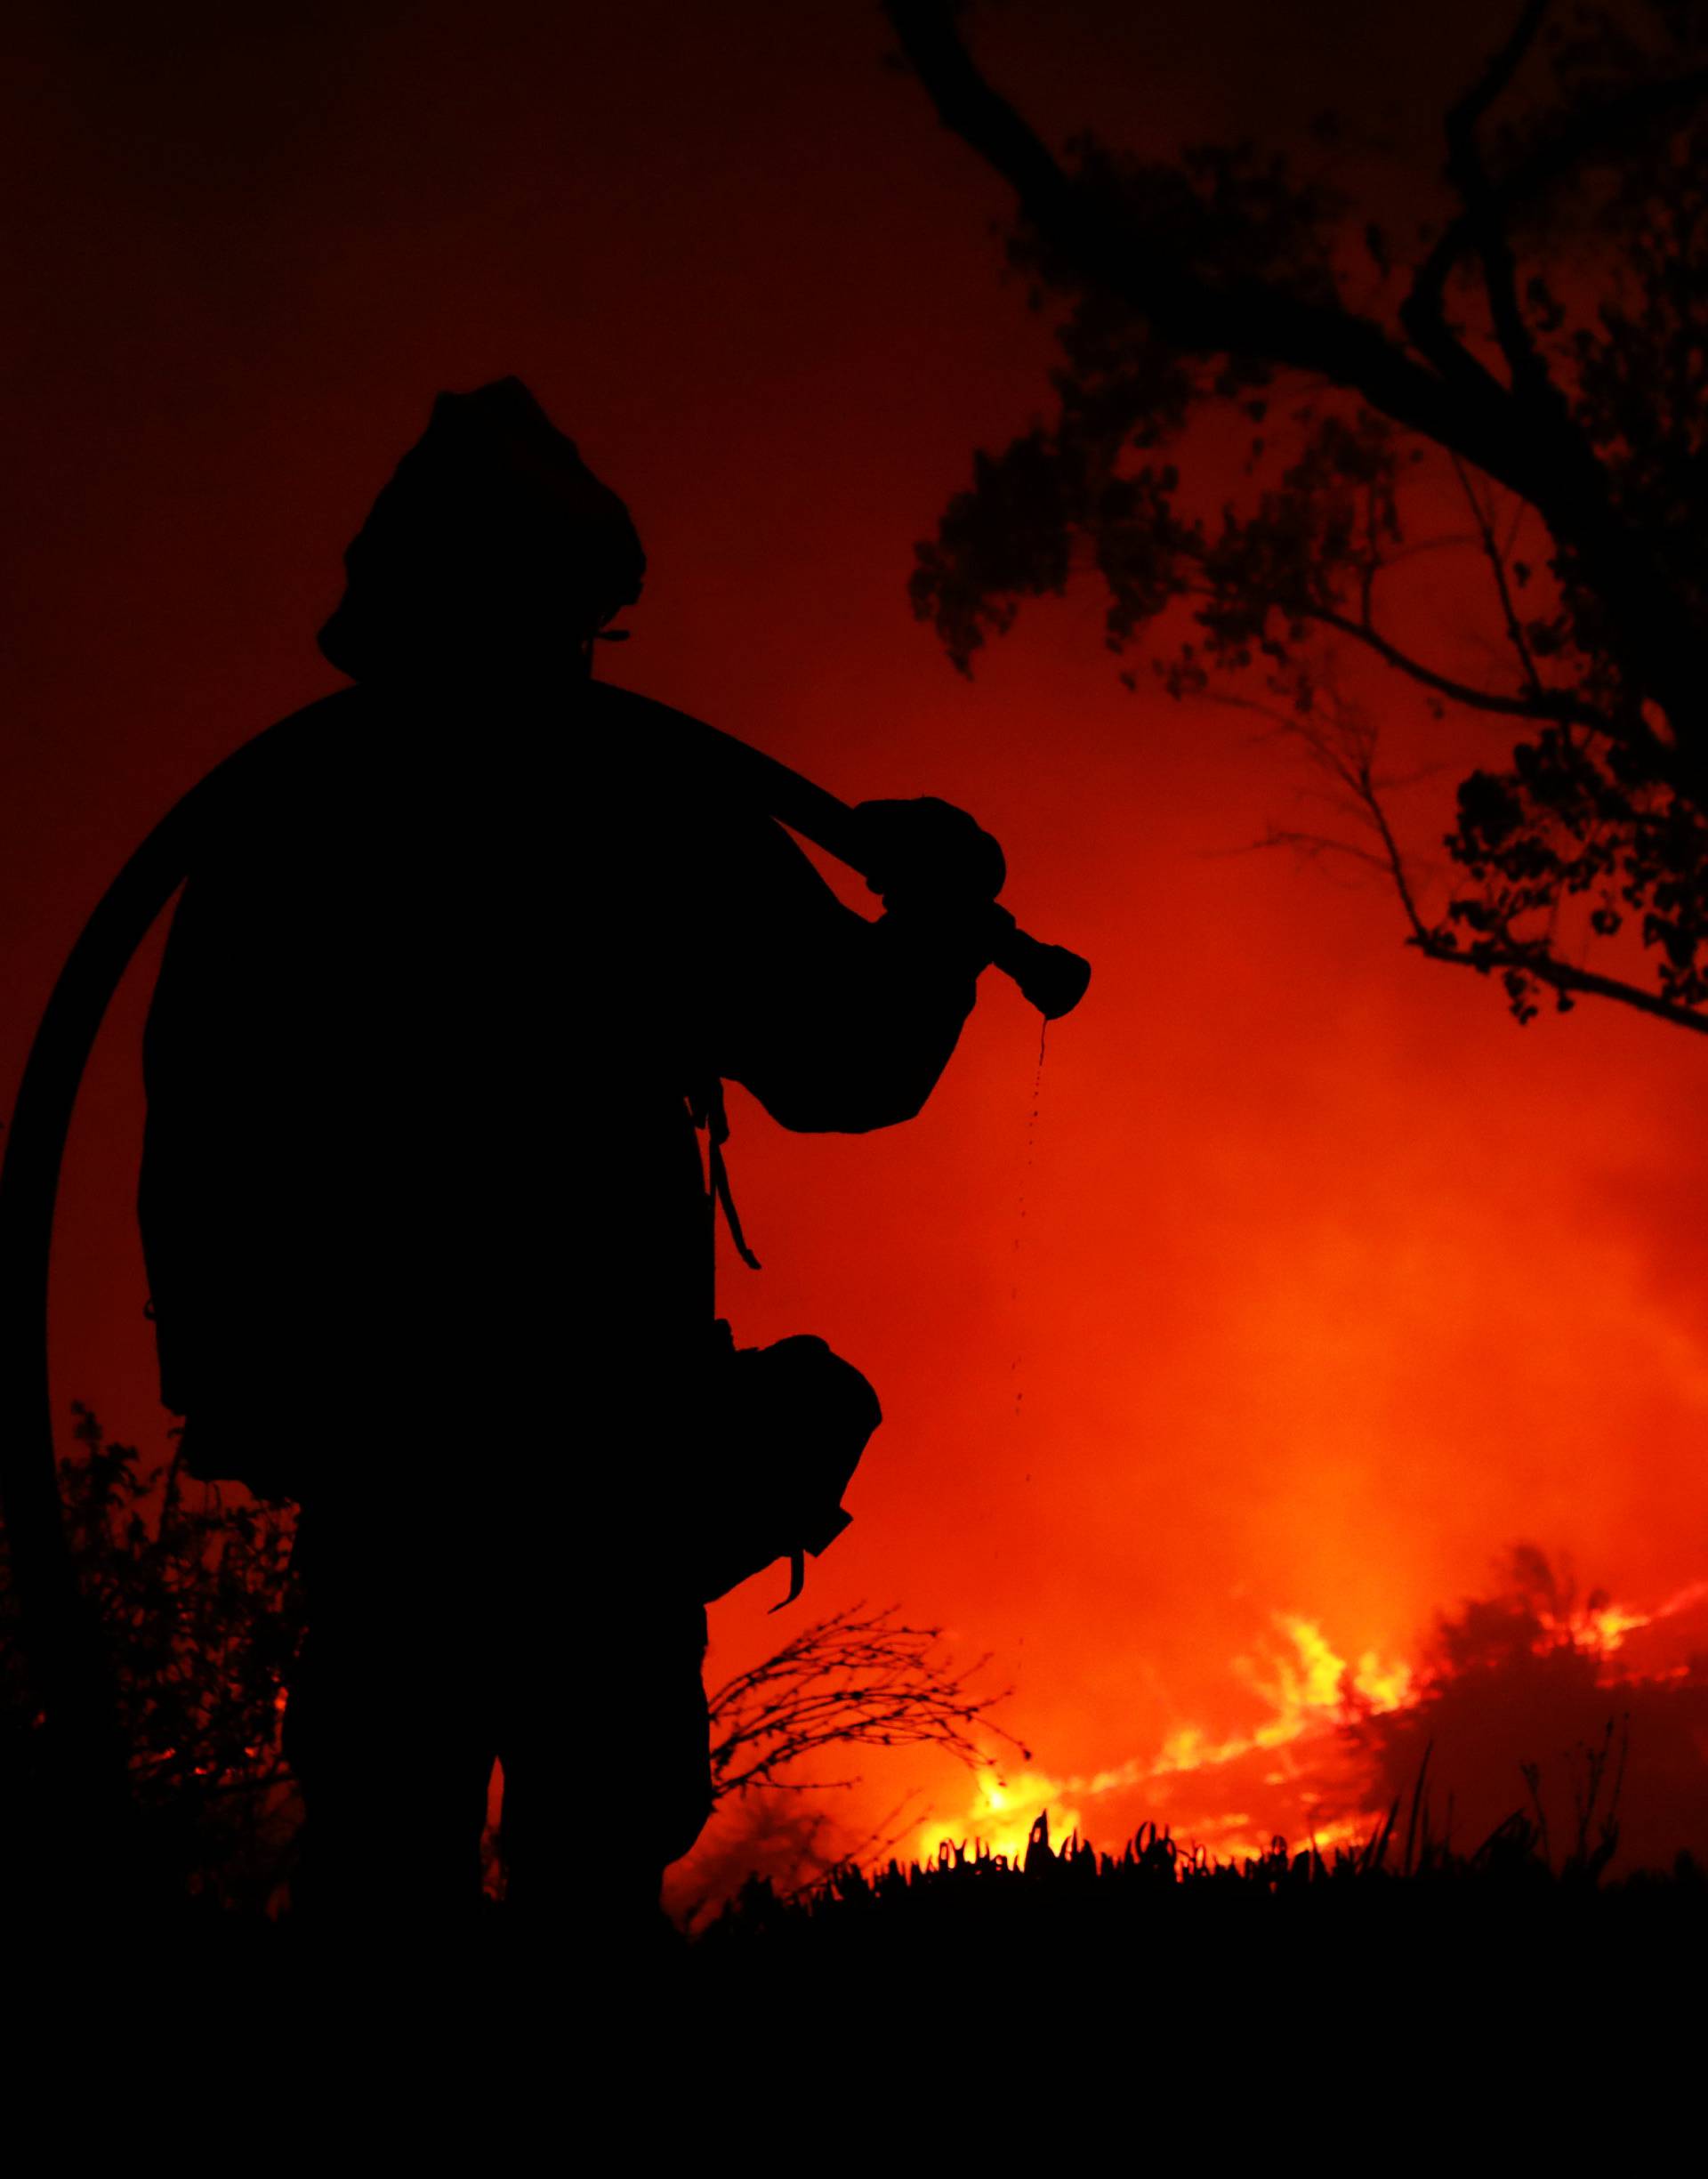 A firefighter working on extinguishing the Lilac Fire a fast moving wildfire is seen in Bonsall